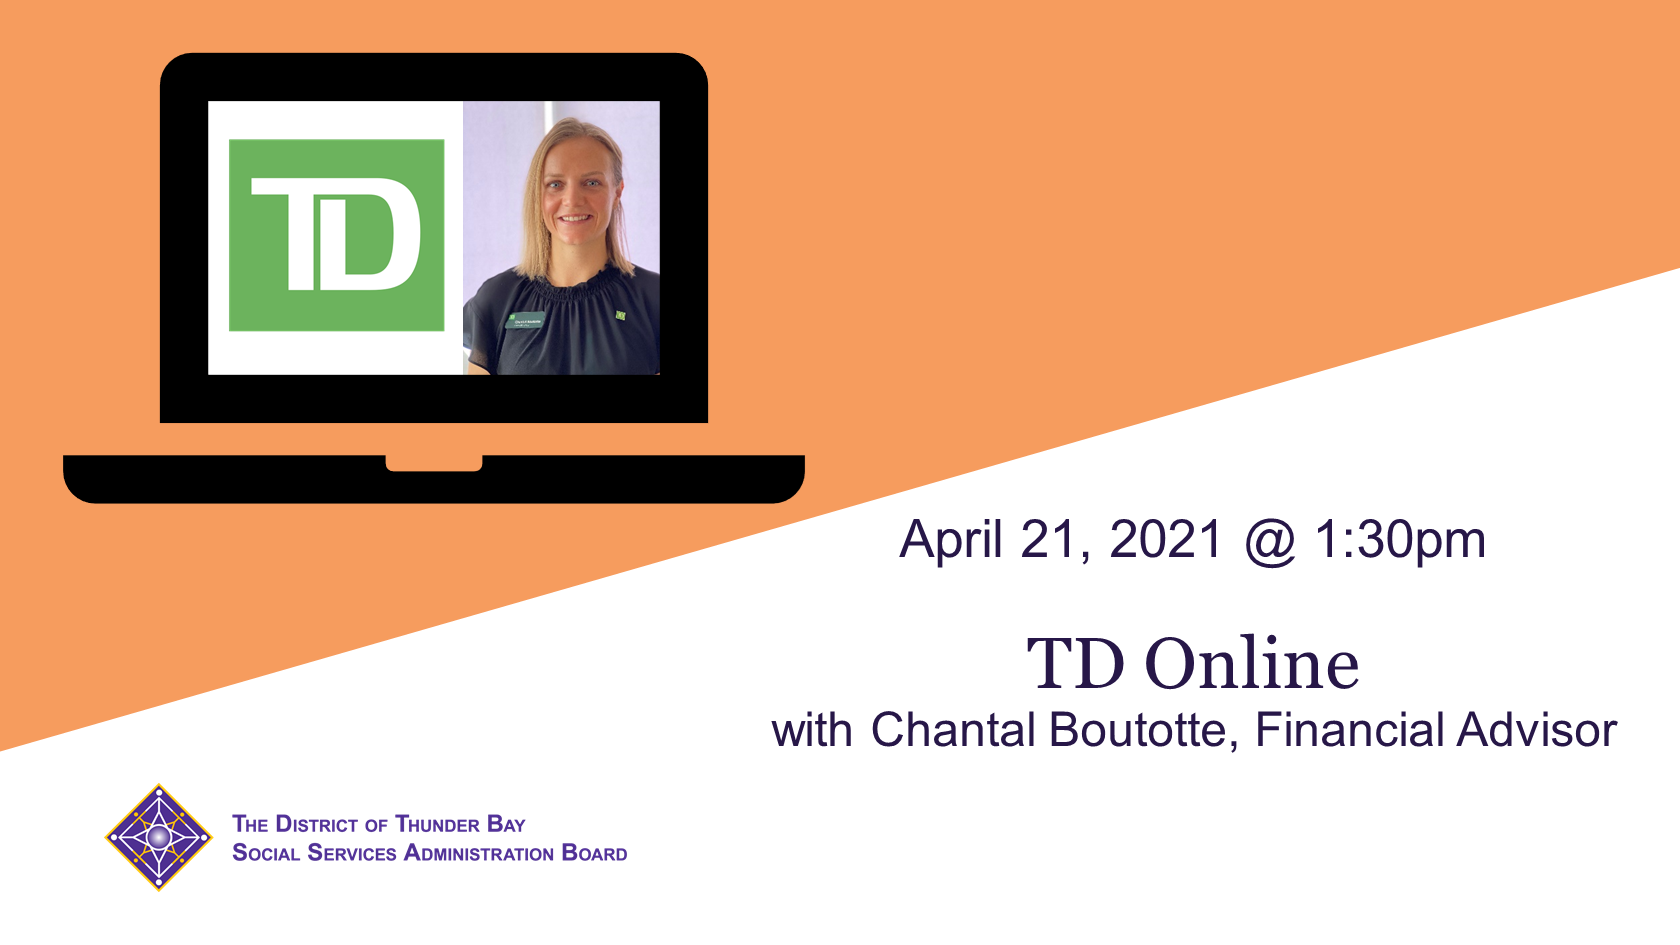 Image of a laptop with a TD logo and headshot of Chantal Boutotte, Financial Advisor, on screen. With text that reads: April 21, 2021 @ 1:30pm. TD Online with Chantal Boutotte, Financial Advisor